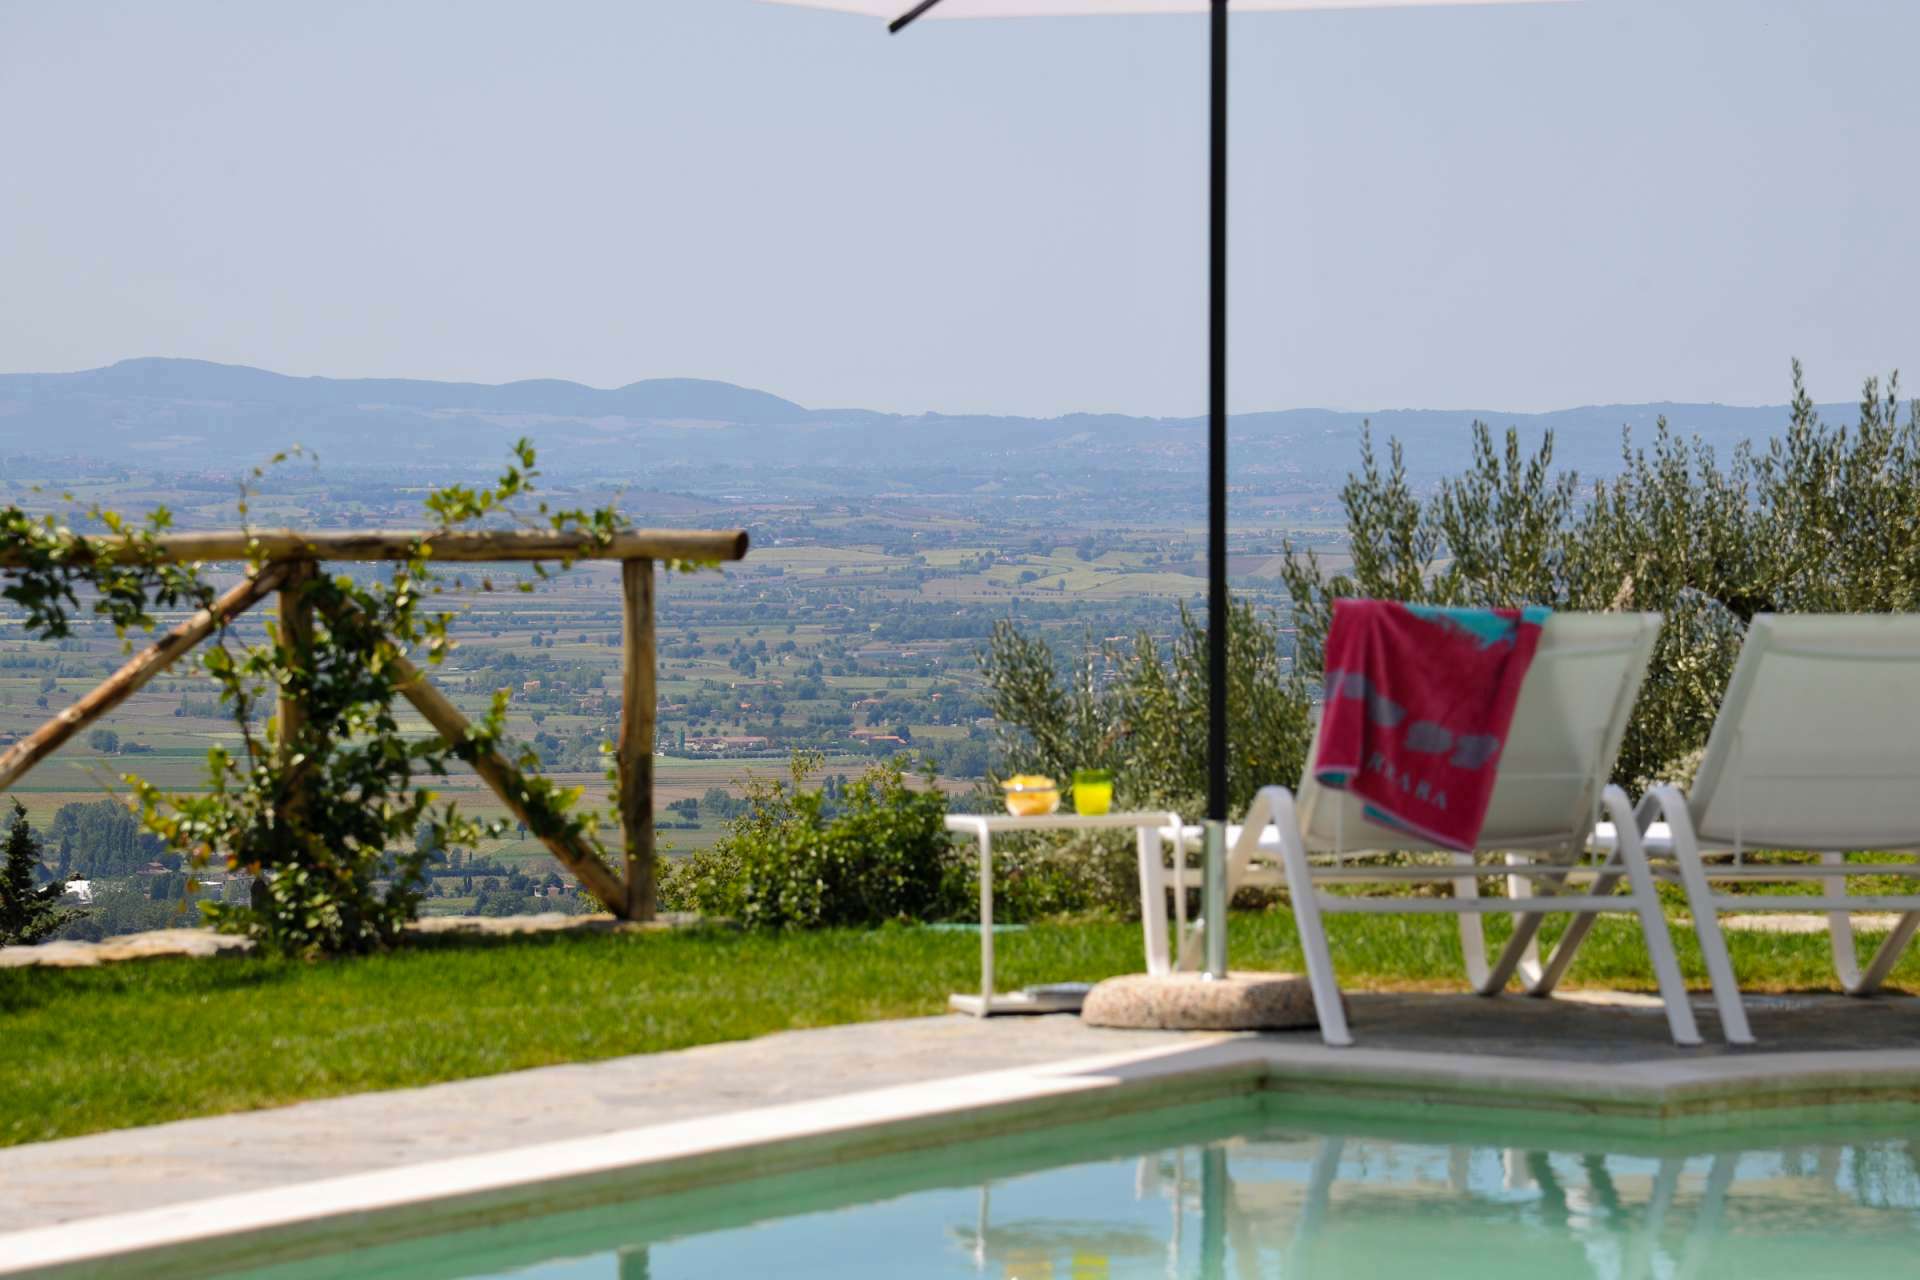 Italian Romance: Why Italy is the Perfect Spot for a Romantic Villa Getaway